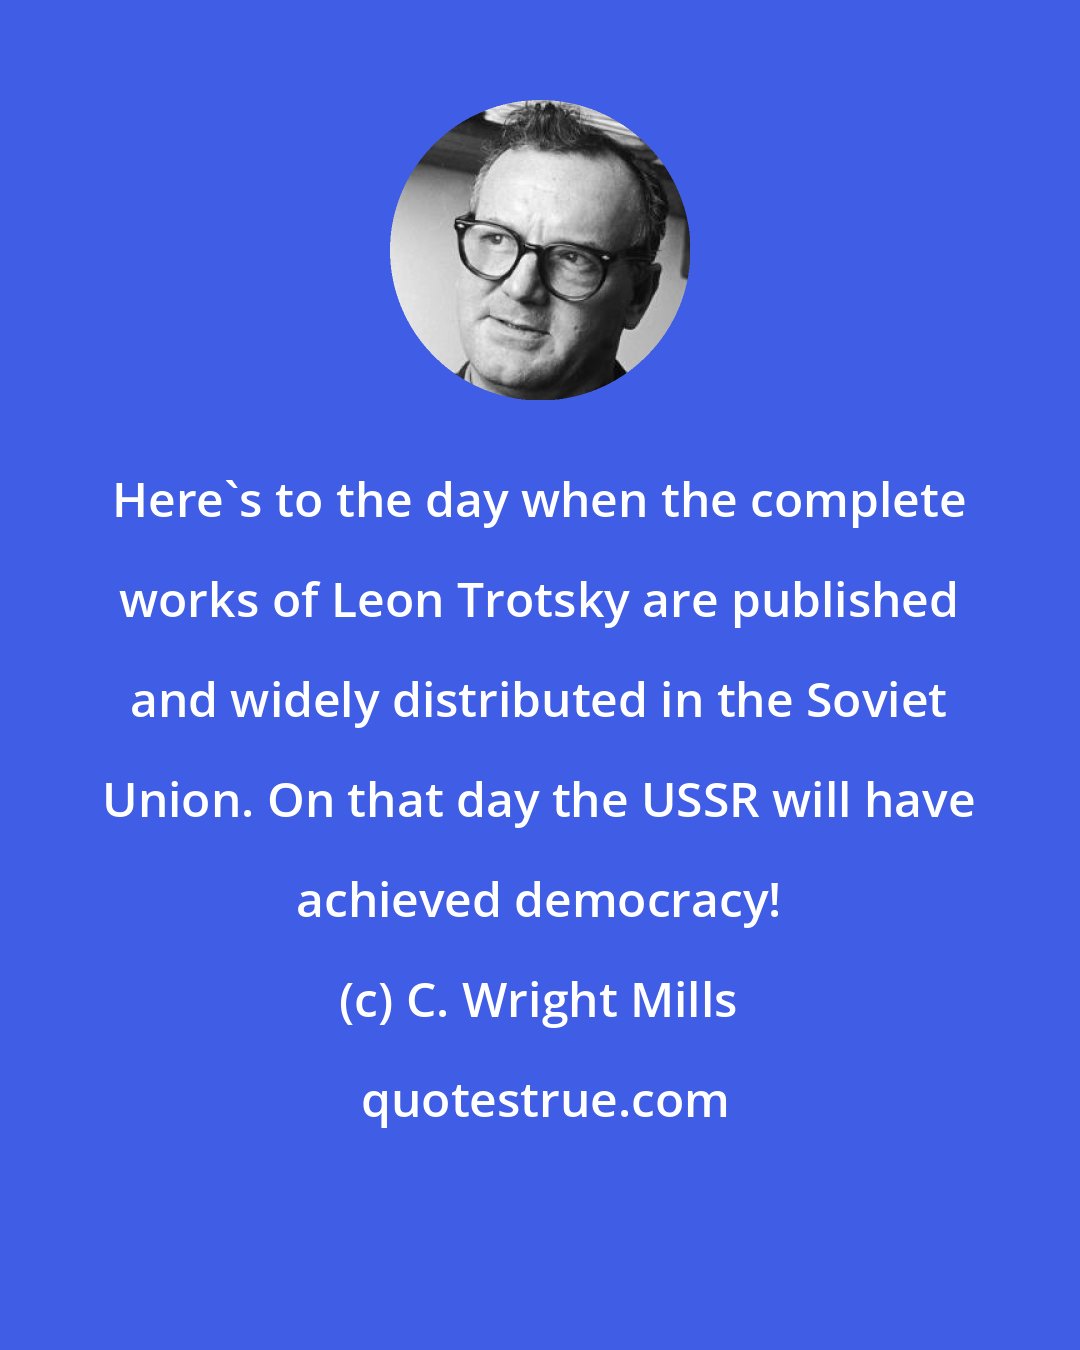 C. Wright Mills: Here's to the day when the complete works of Leon Trotsky are published and widely distributed in the Soviet Union. On that day the USSR will have achieved democracy!